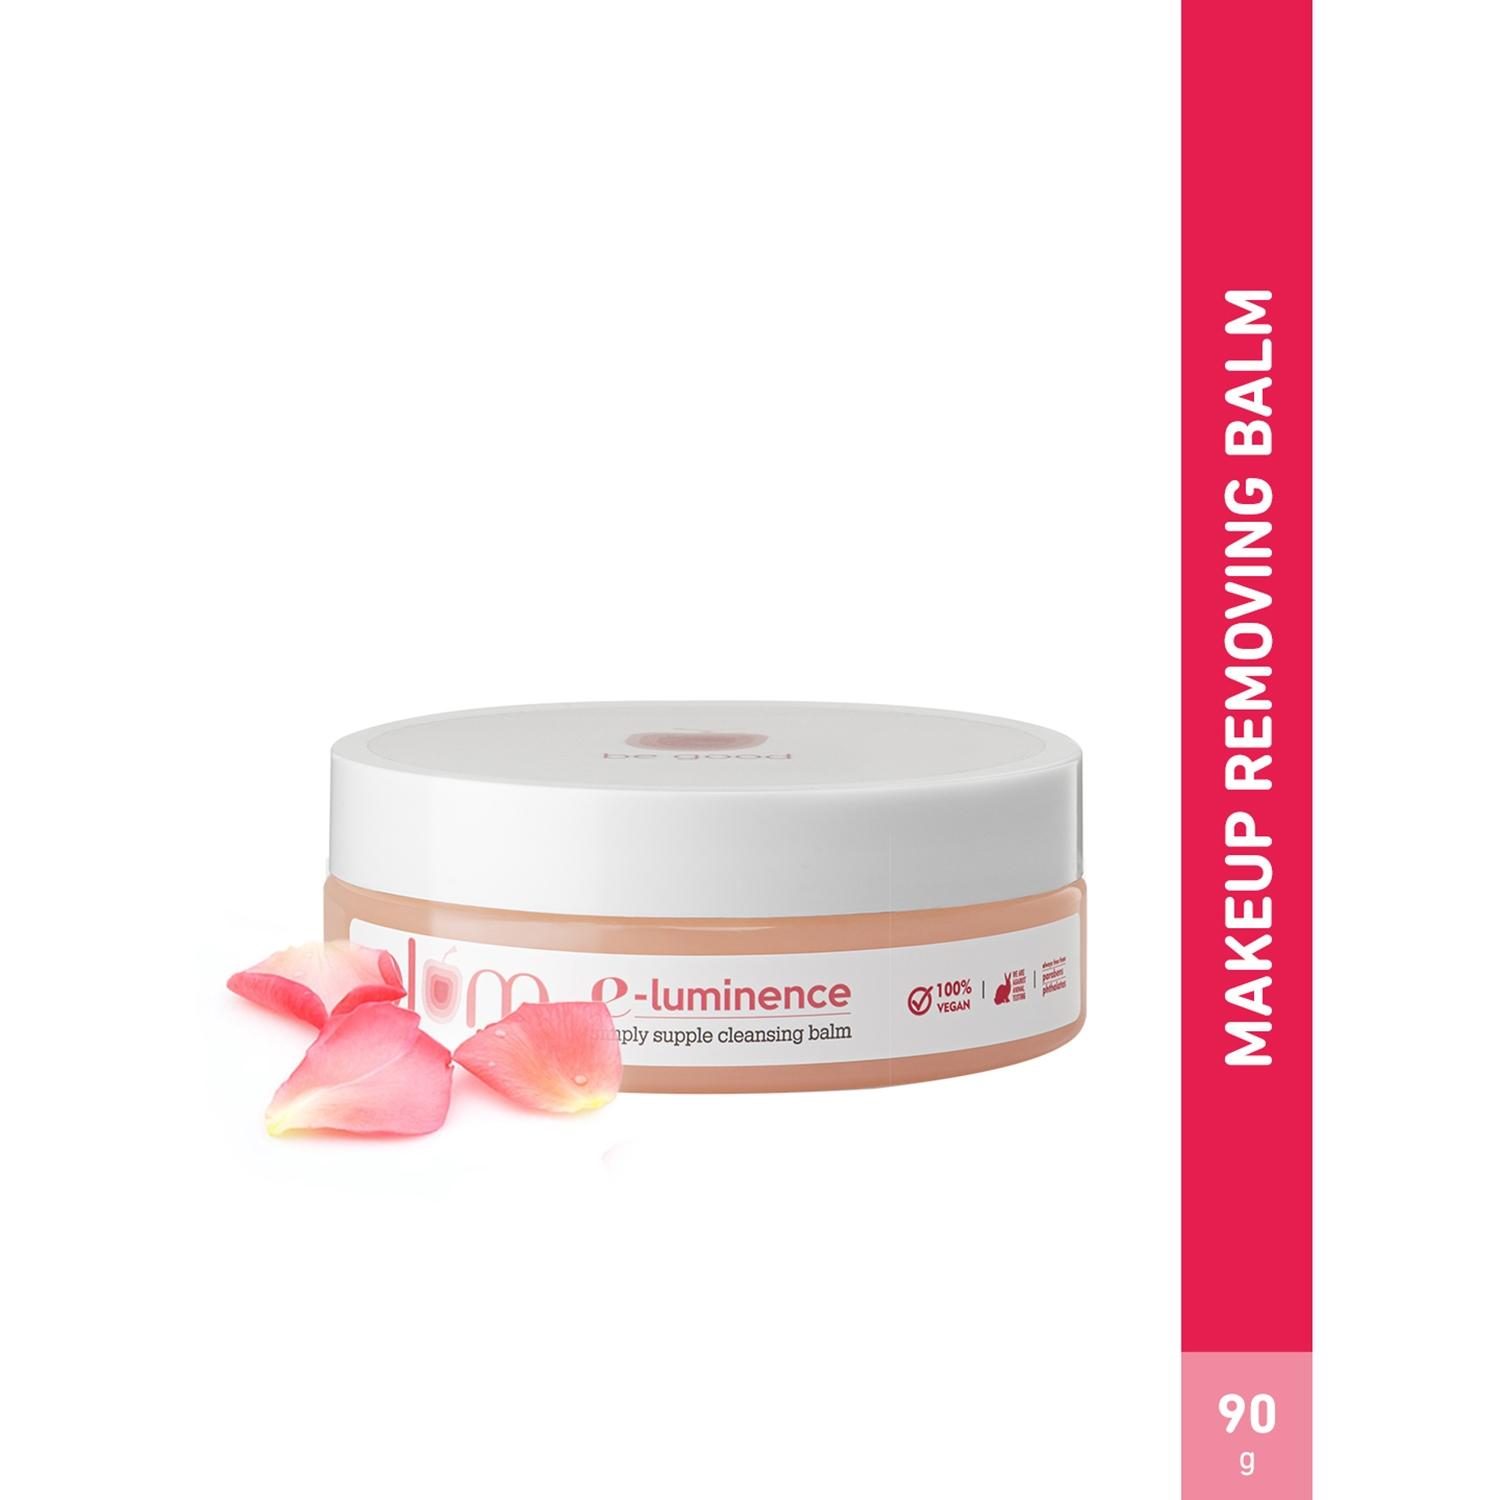 plum e-luminence supple cleansing balm, non-drying face, lip & eye waterproof makeup remover (90g)